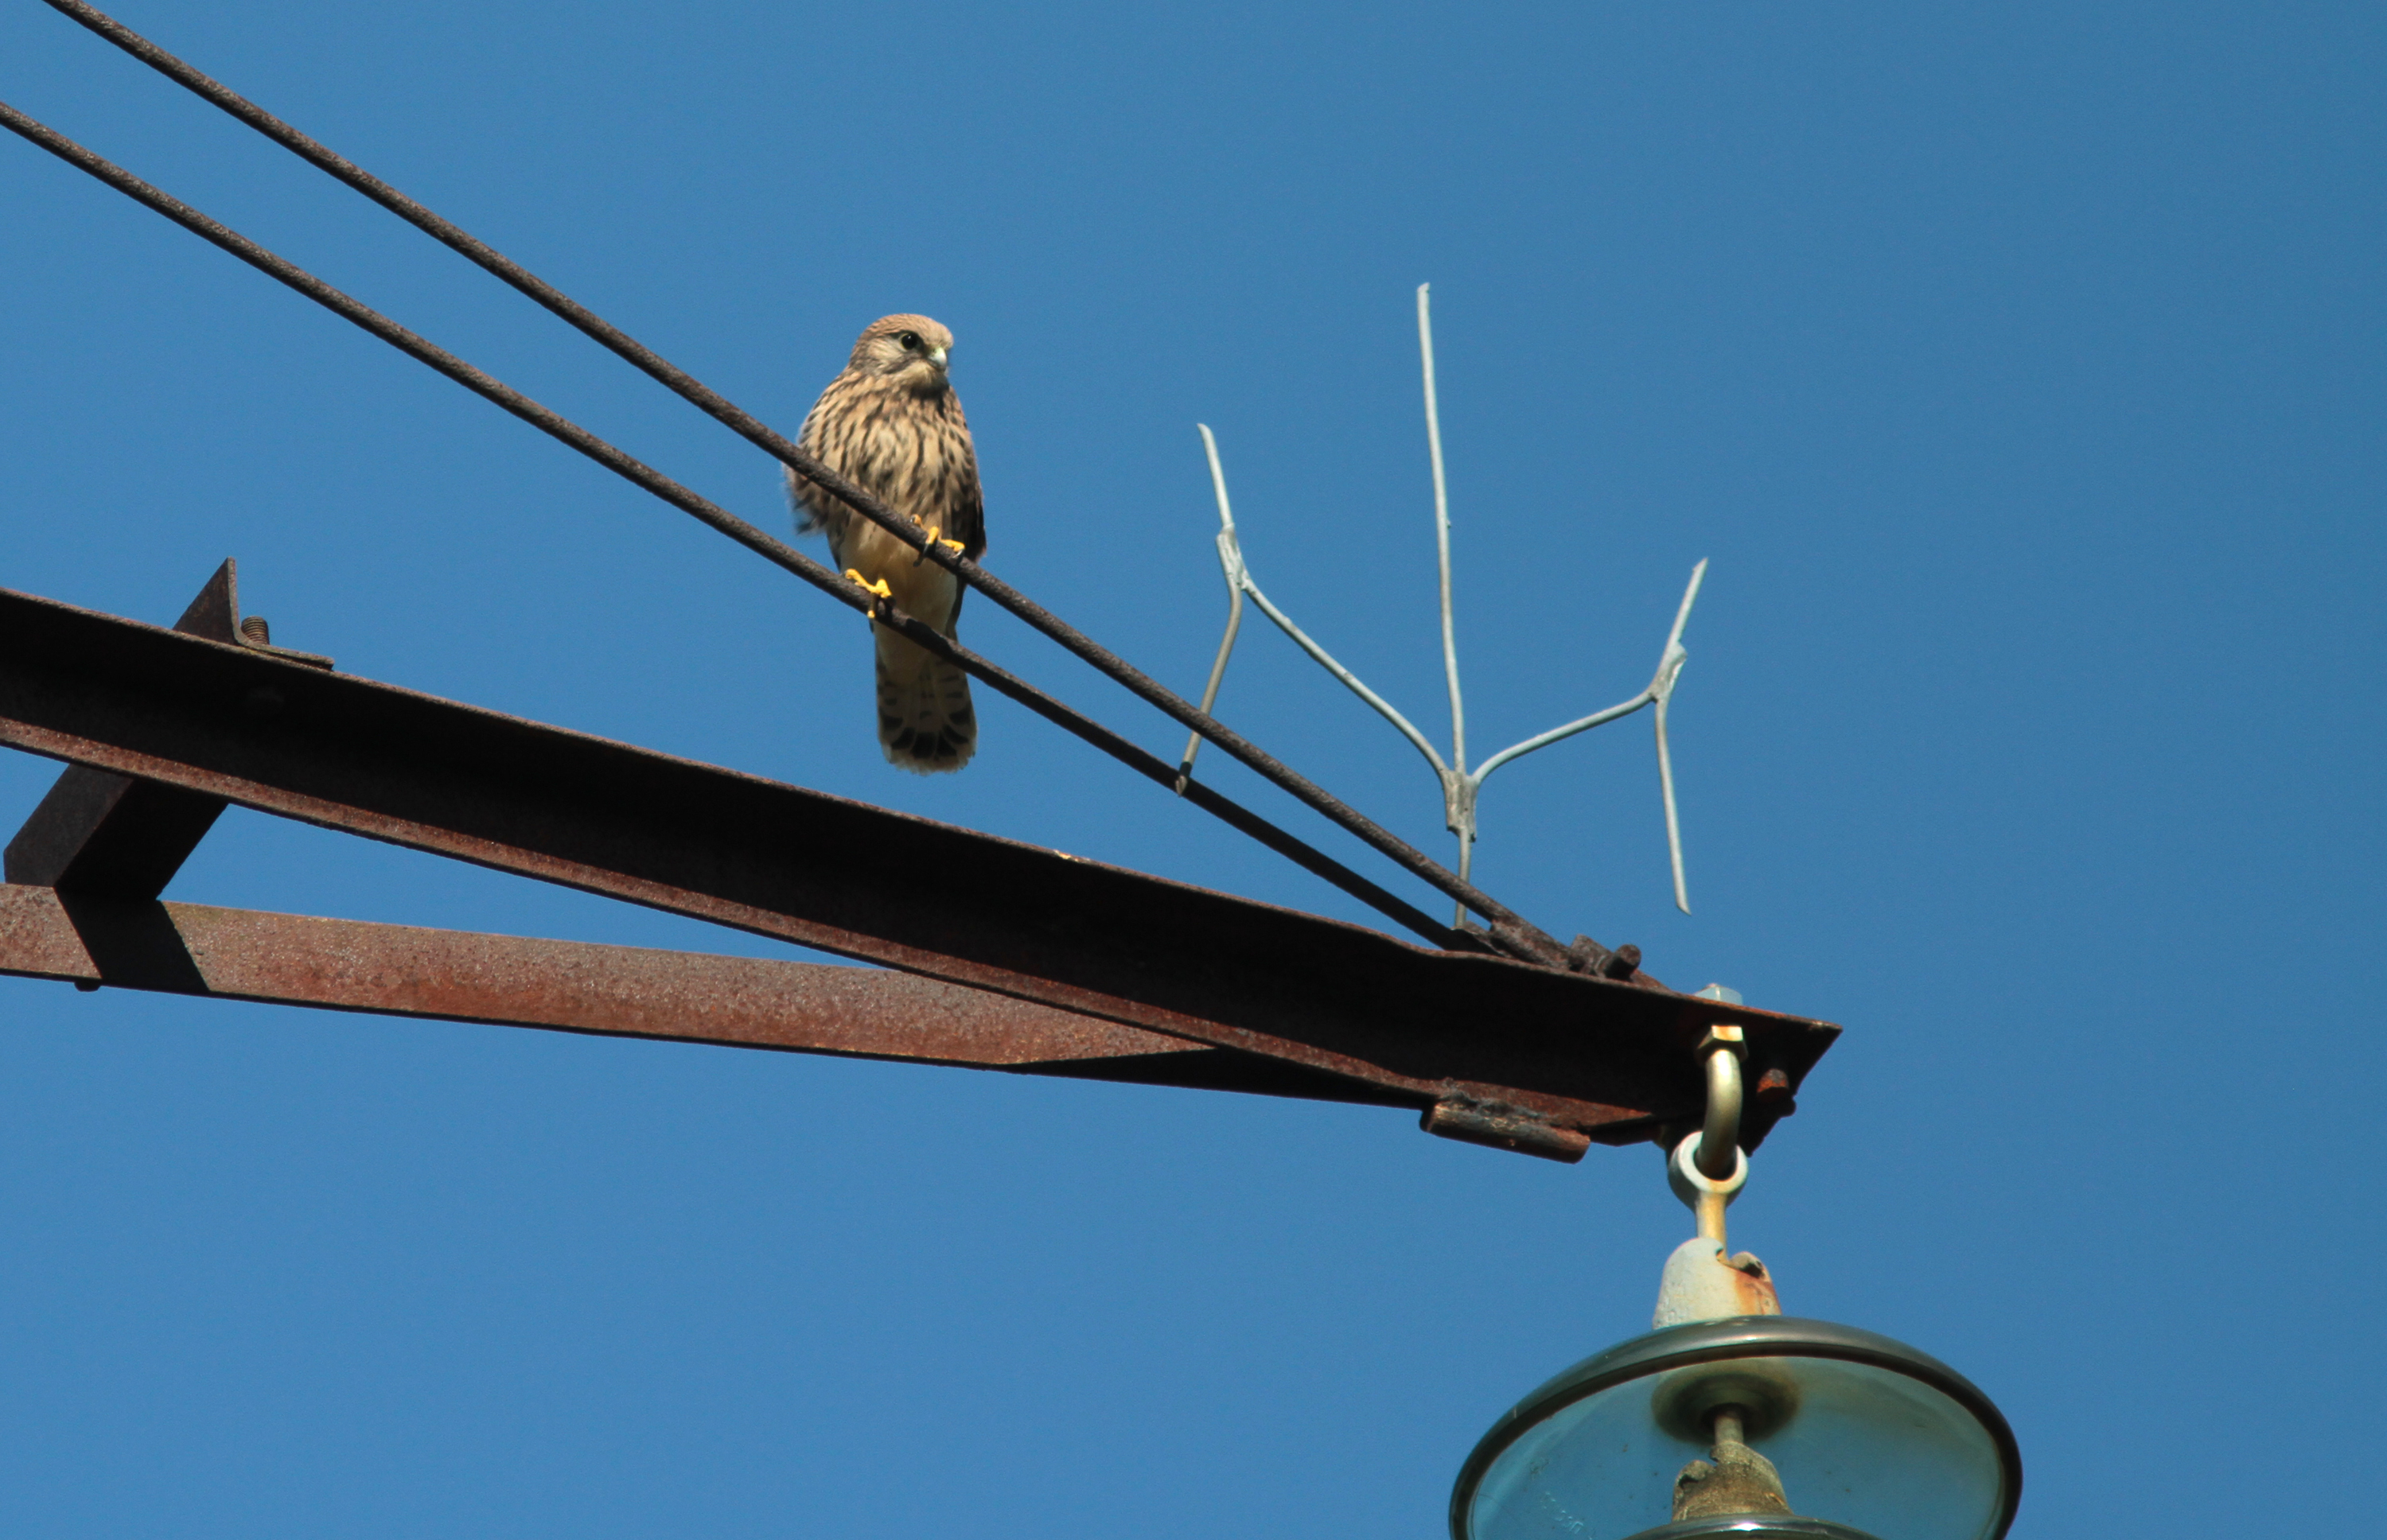 European Commission has approved the final LIFE Birds on Electrogrid report 